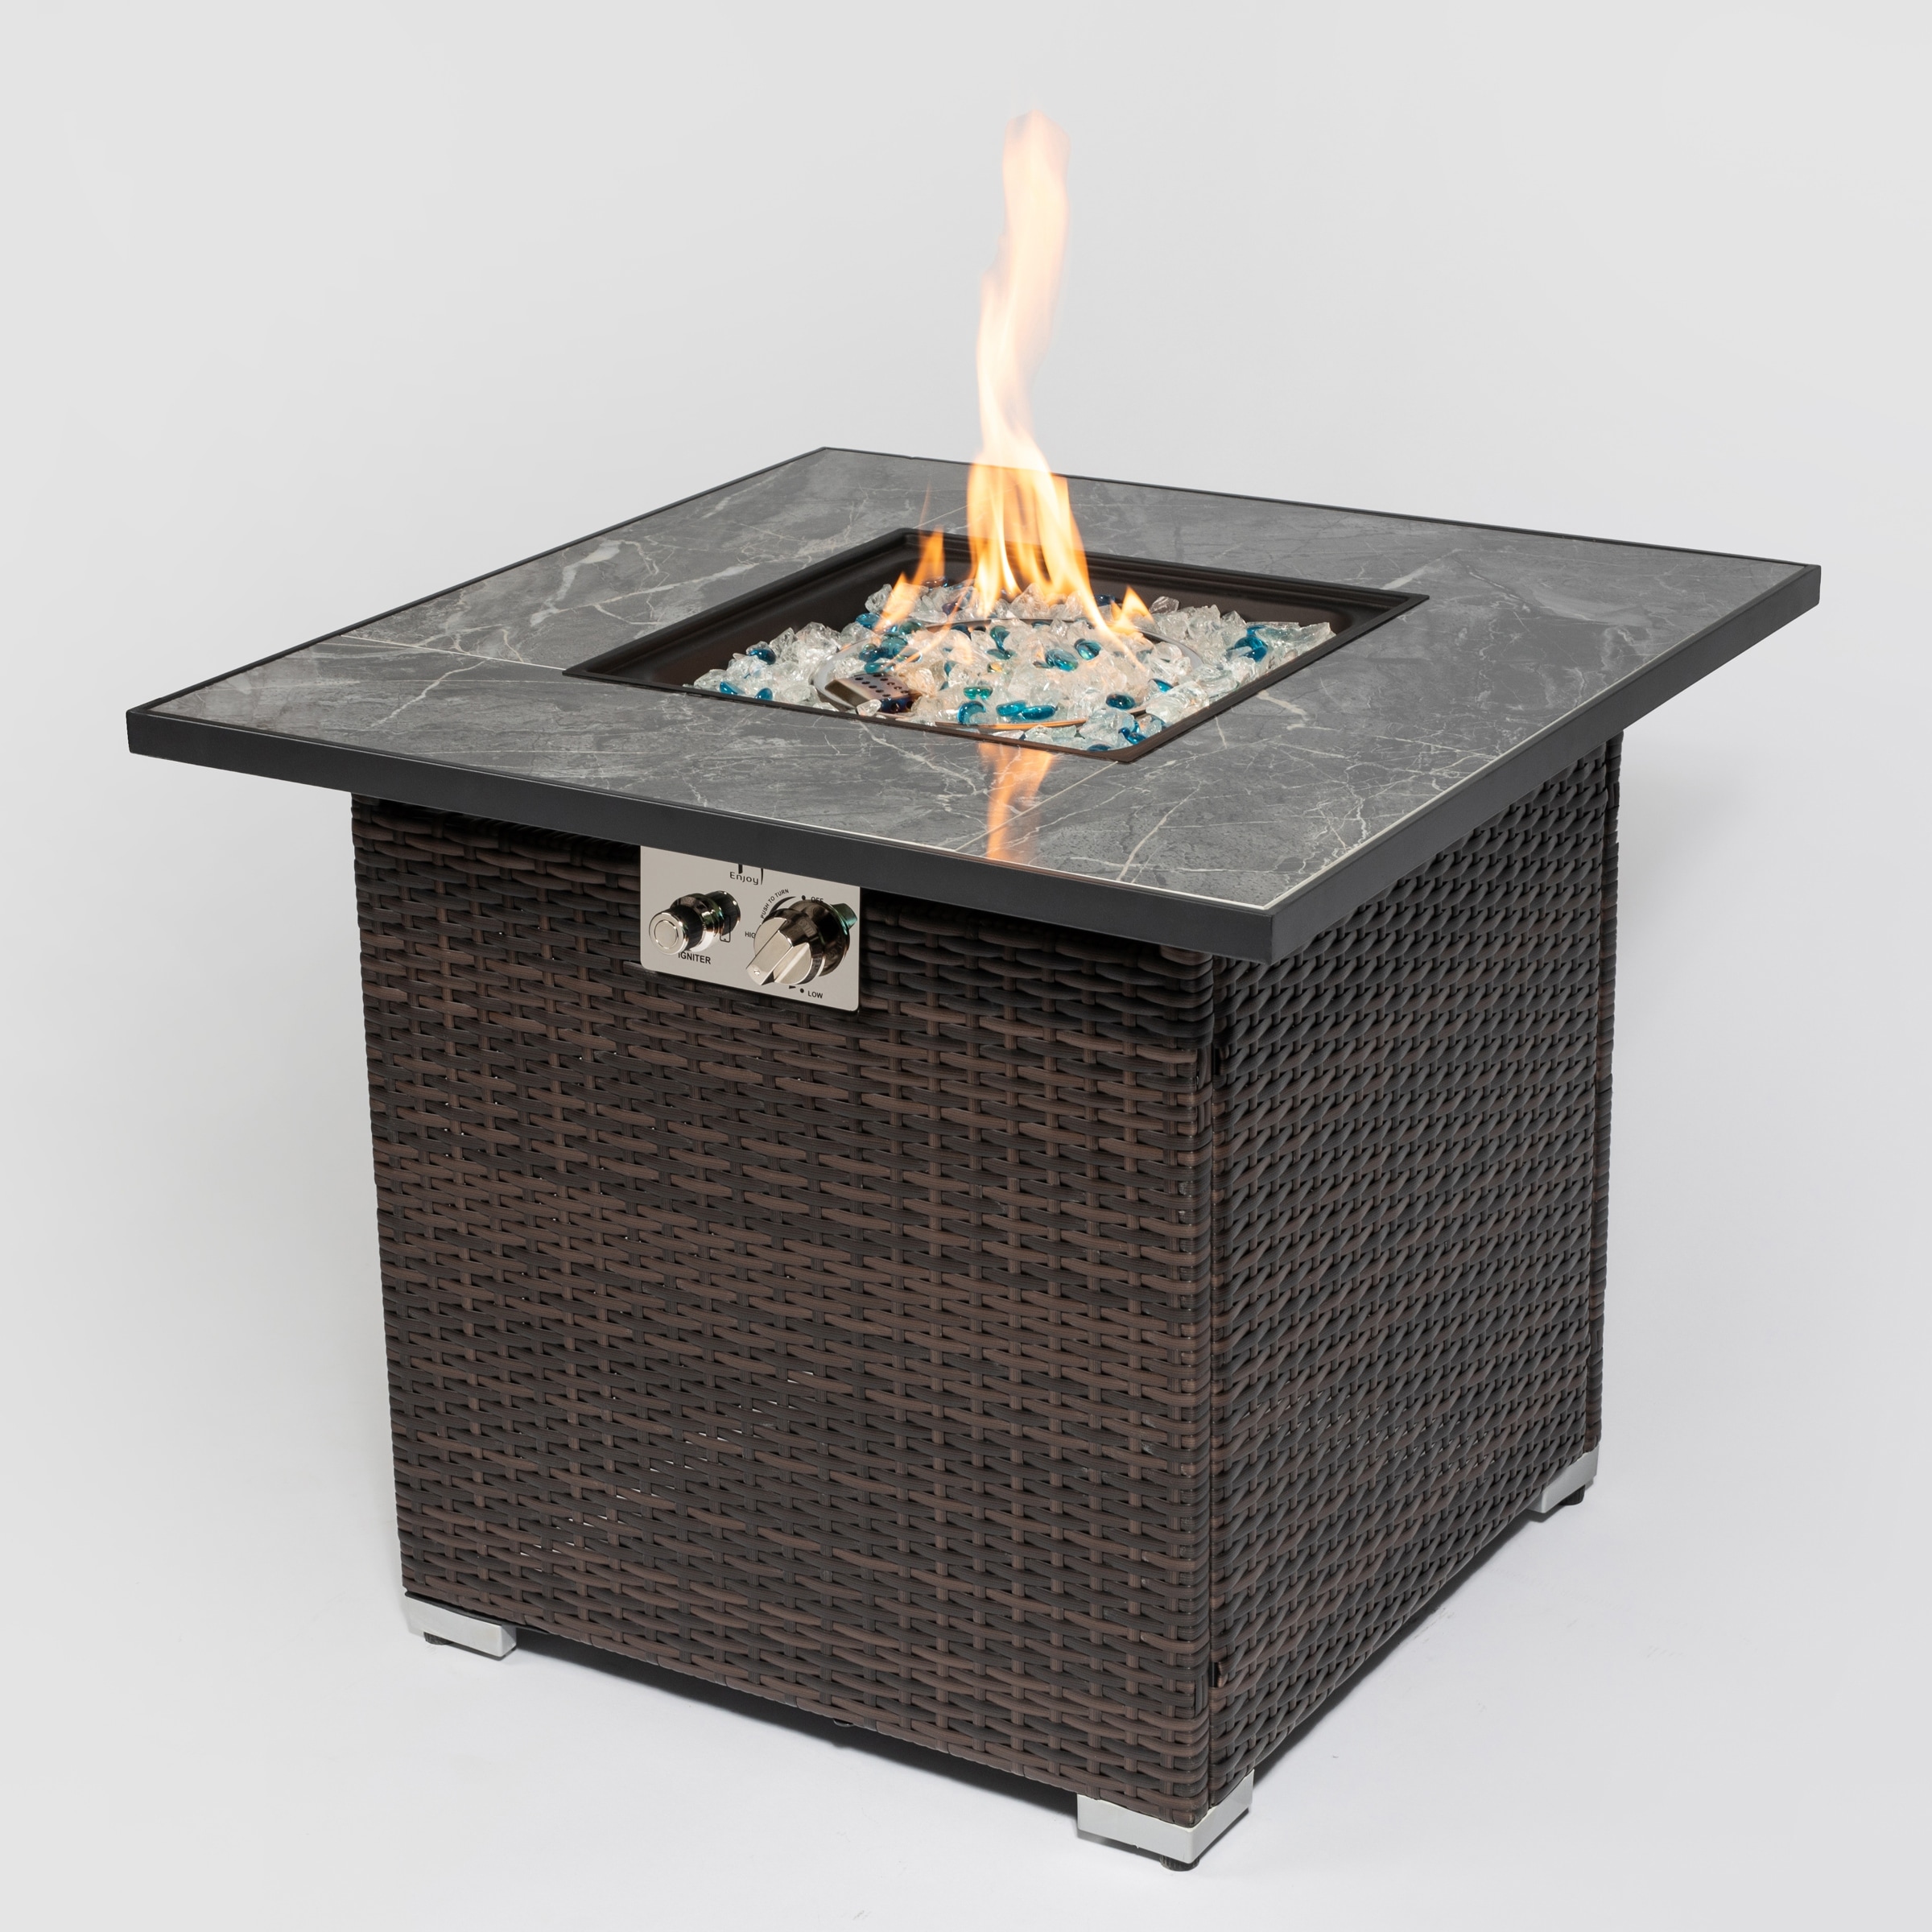 EDWINRAY 29.9 inch Square Outdoor Fire Table Propane Gas Fire Pit Table with Ceramic Tile Tabletop and Steel Frame, Glass Rocks and Rain Cover